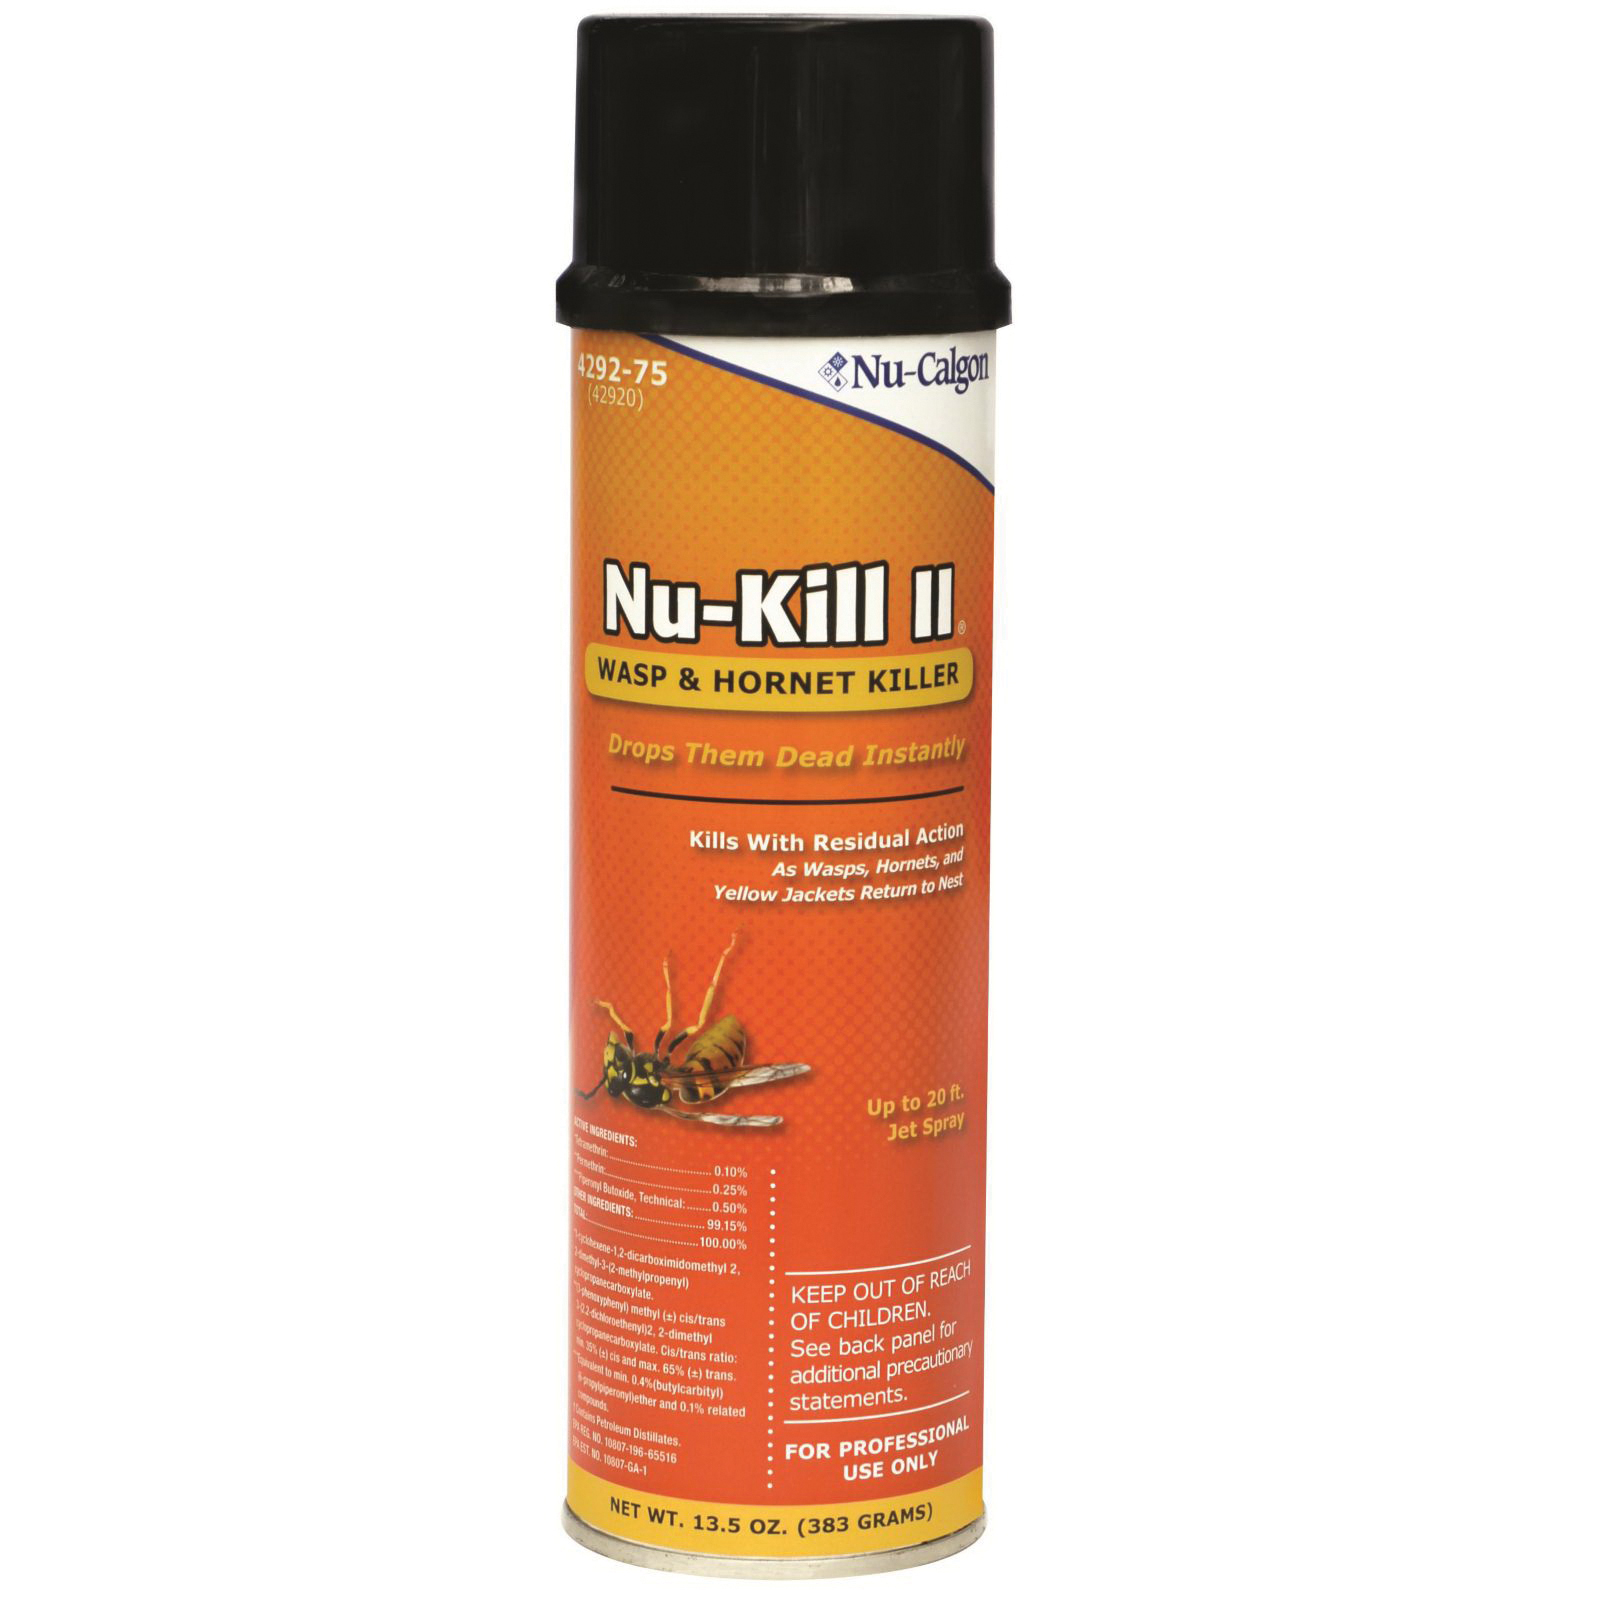 Nu-Calgon Nu-Kill II 4292-75 Wasp and Hornet Killer, 13.5 oz, Aerosol Can, Liquefied Gas, Colorless to Light Yellow